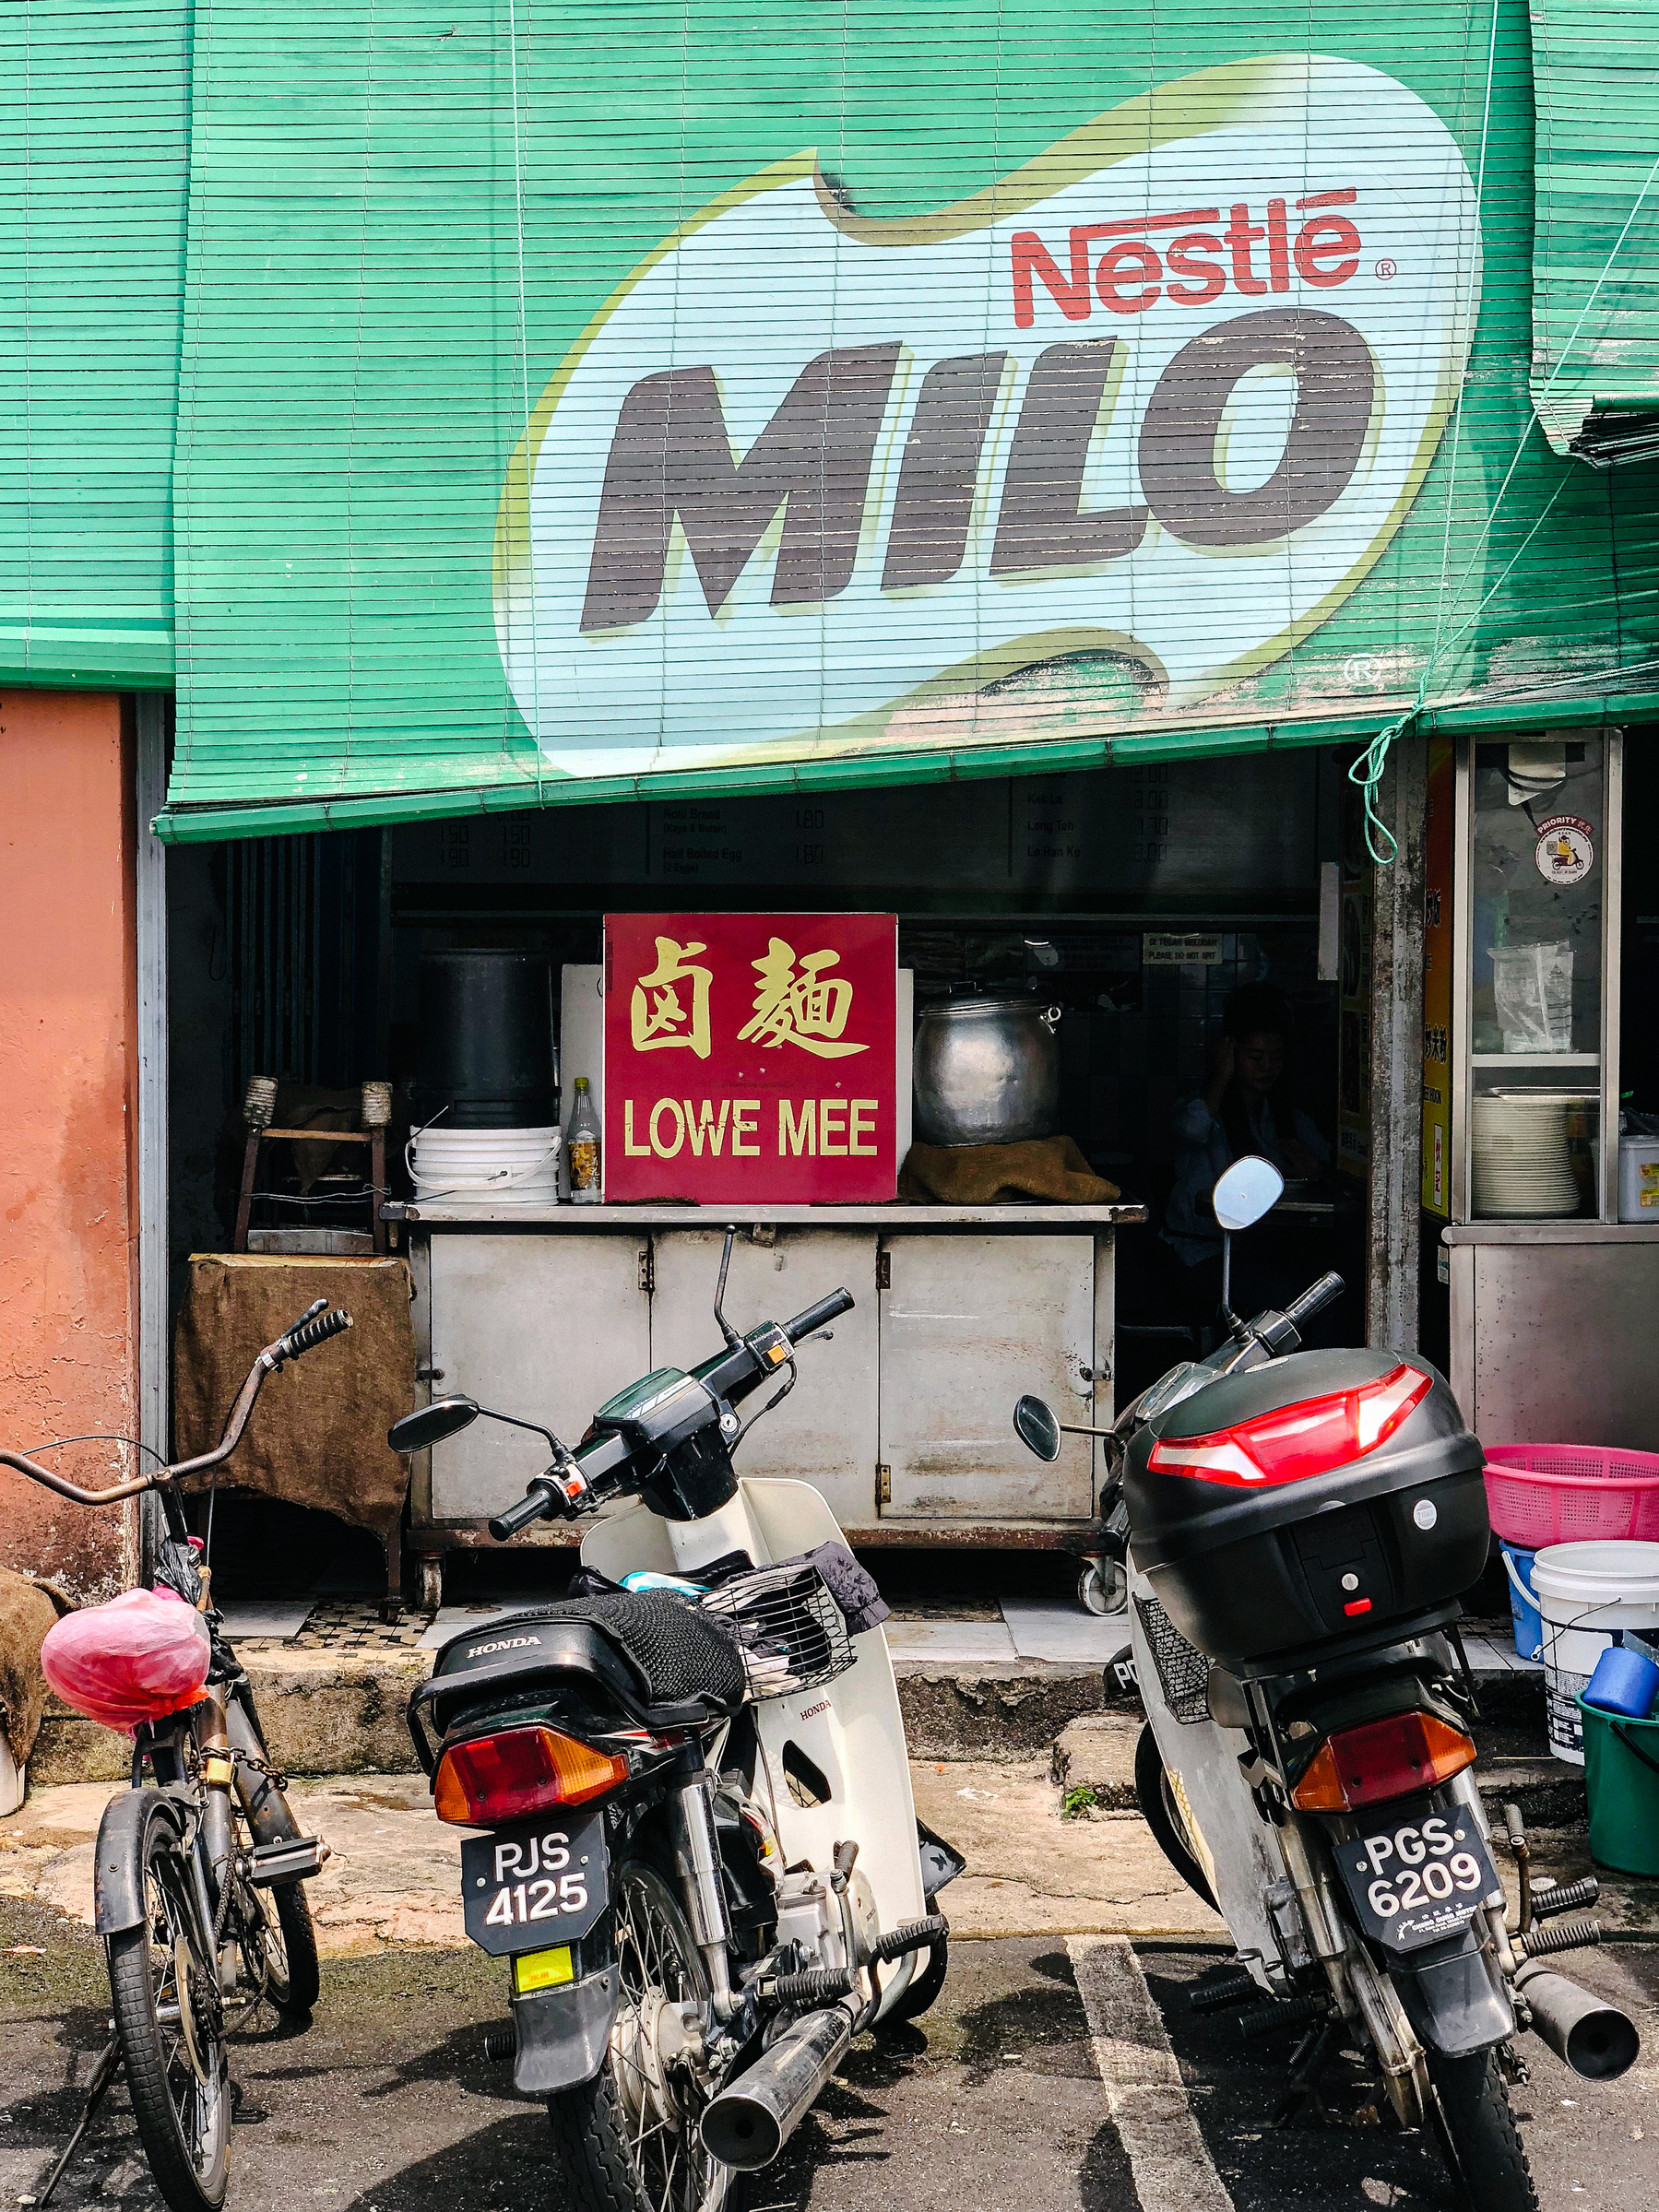 A store front with a huge ad for Milo, parked motorcycles, and a sign that reads “lowe mee”. 